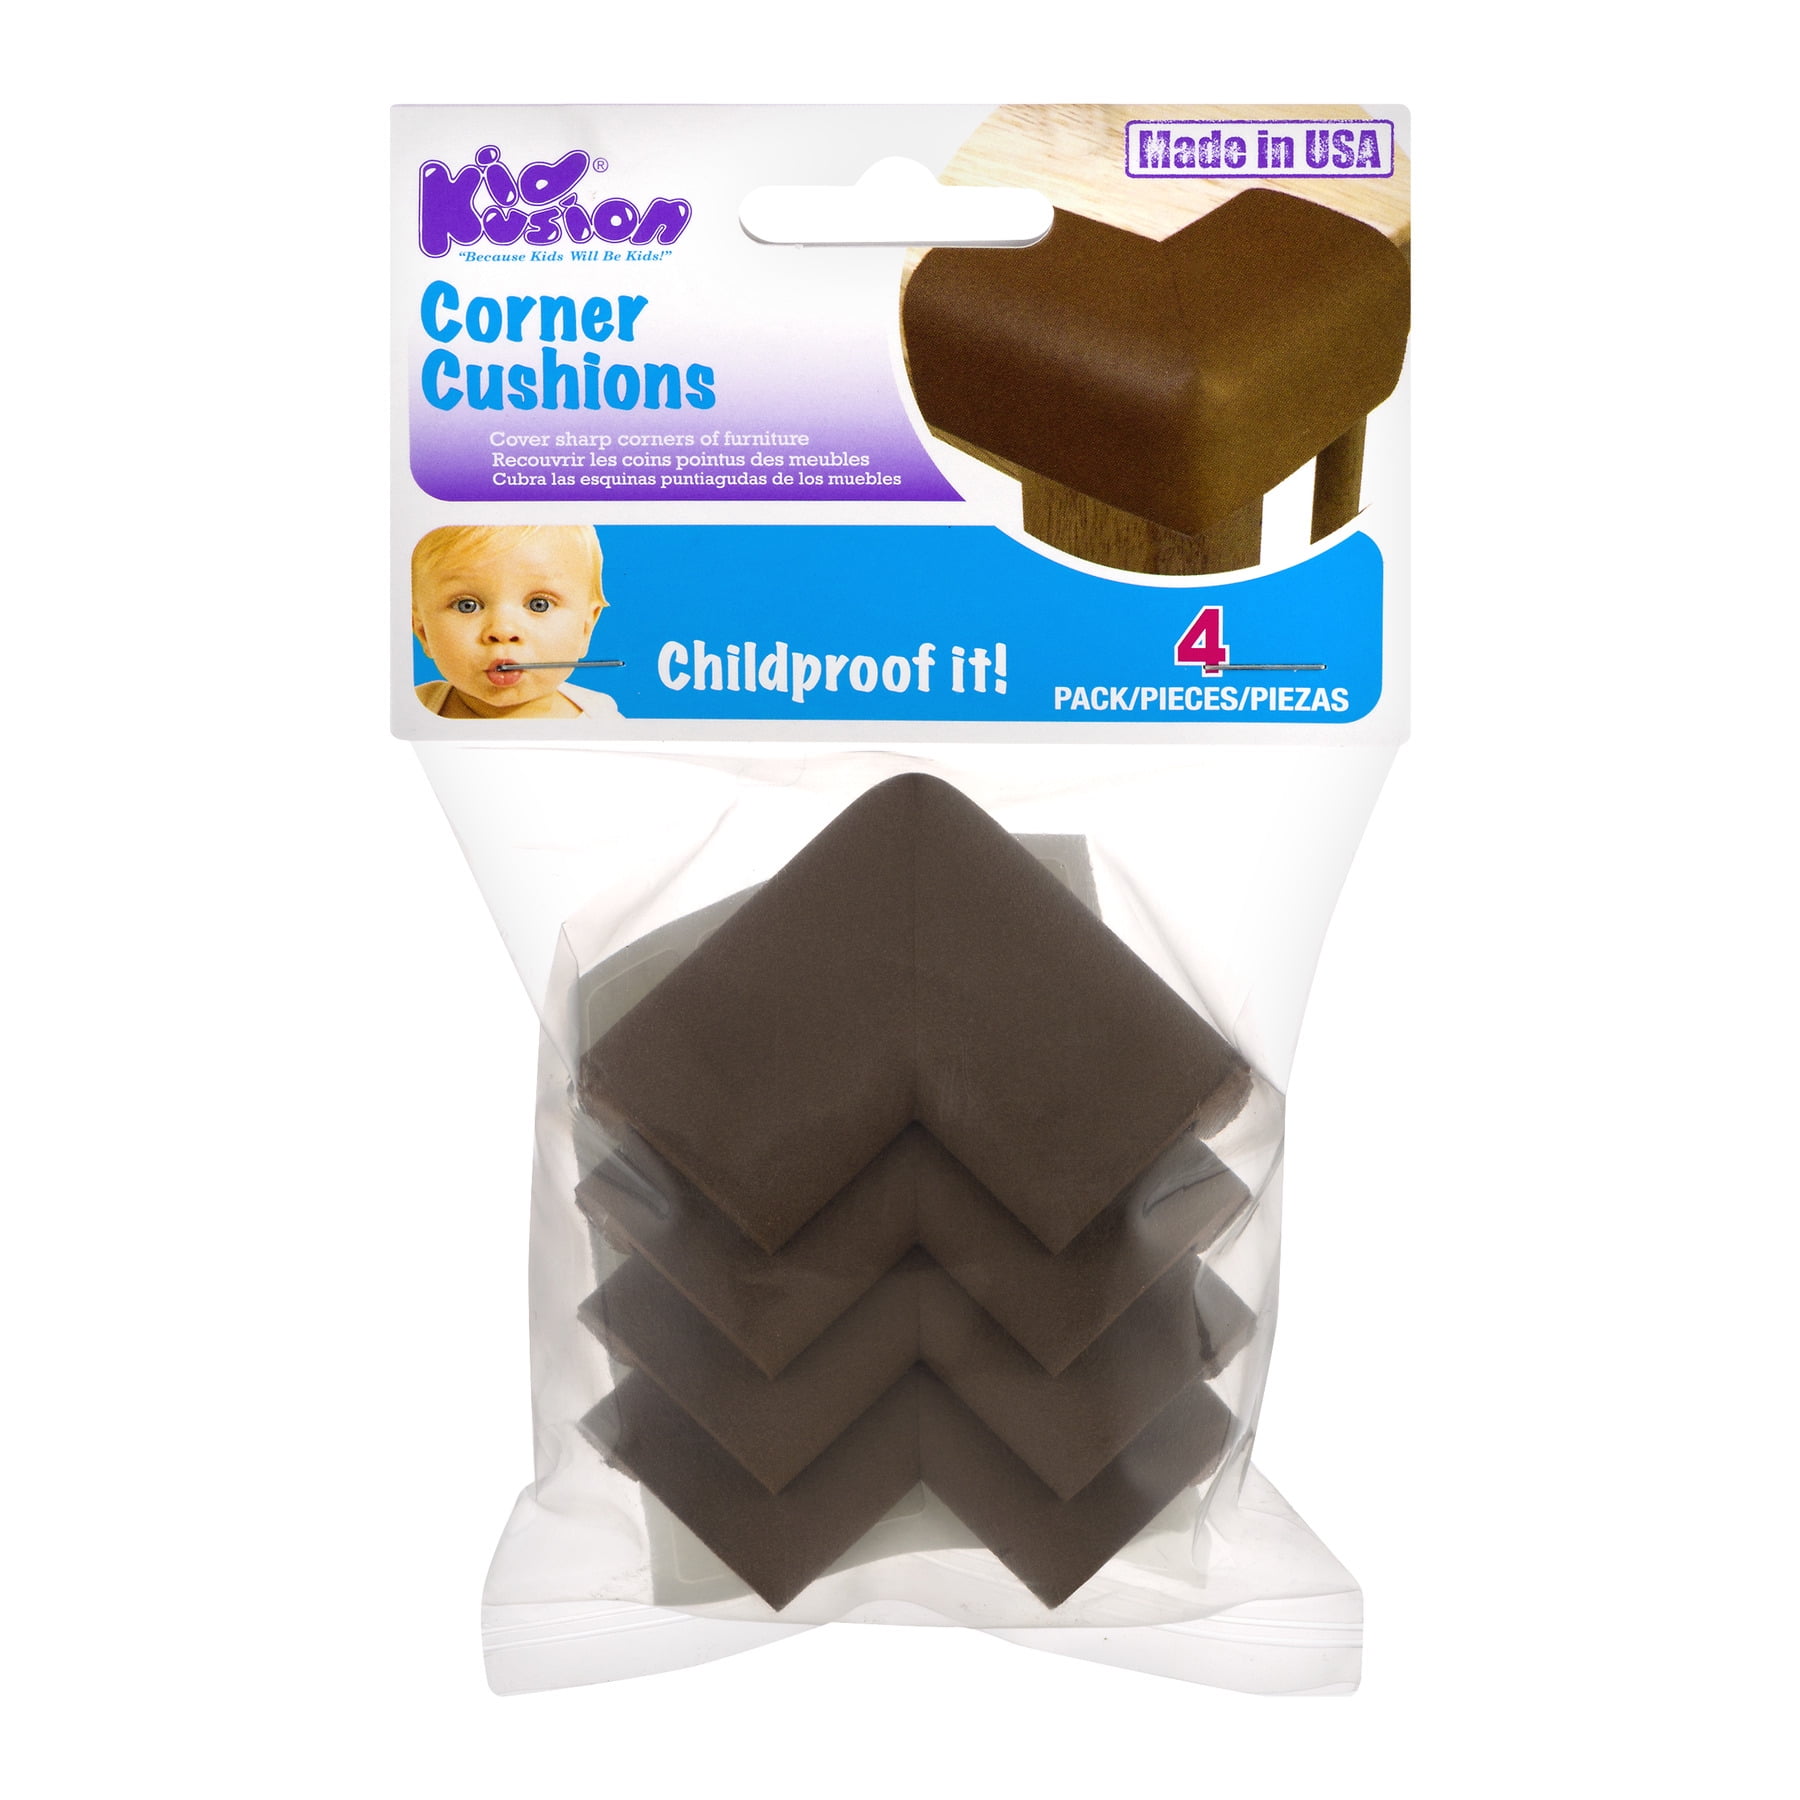 Child Safety Corner Protectors Canwn Soft Foam Baby Proofing